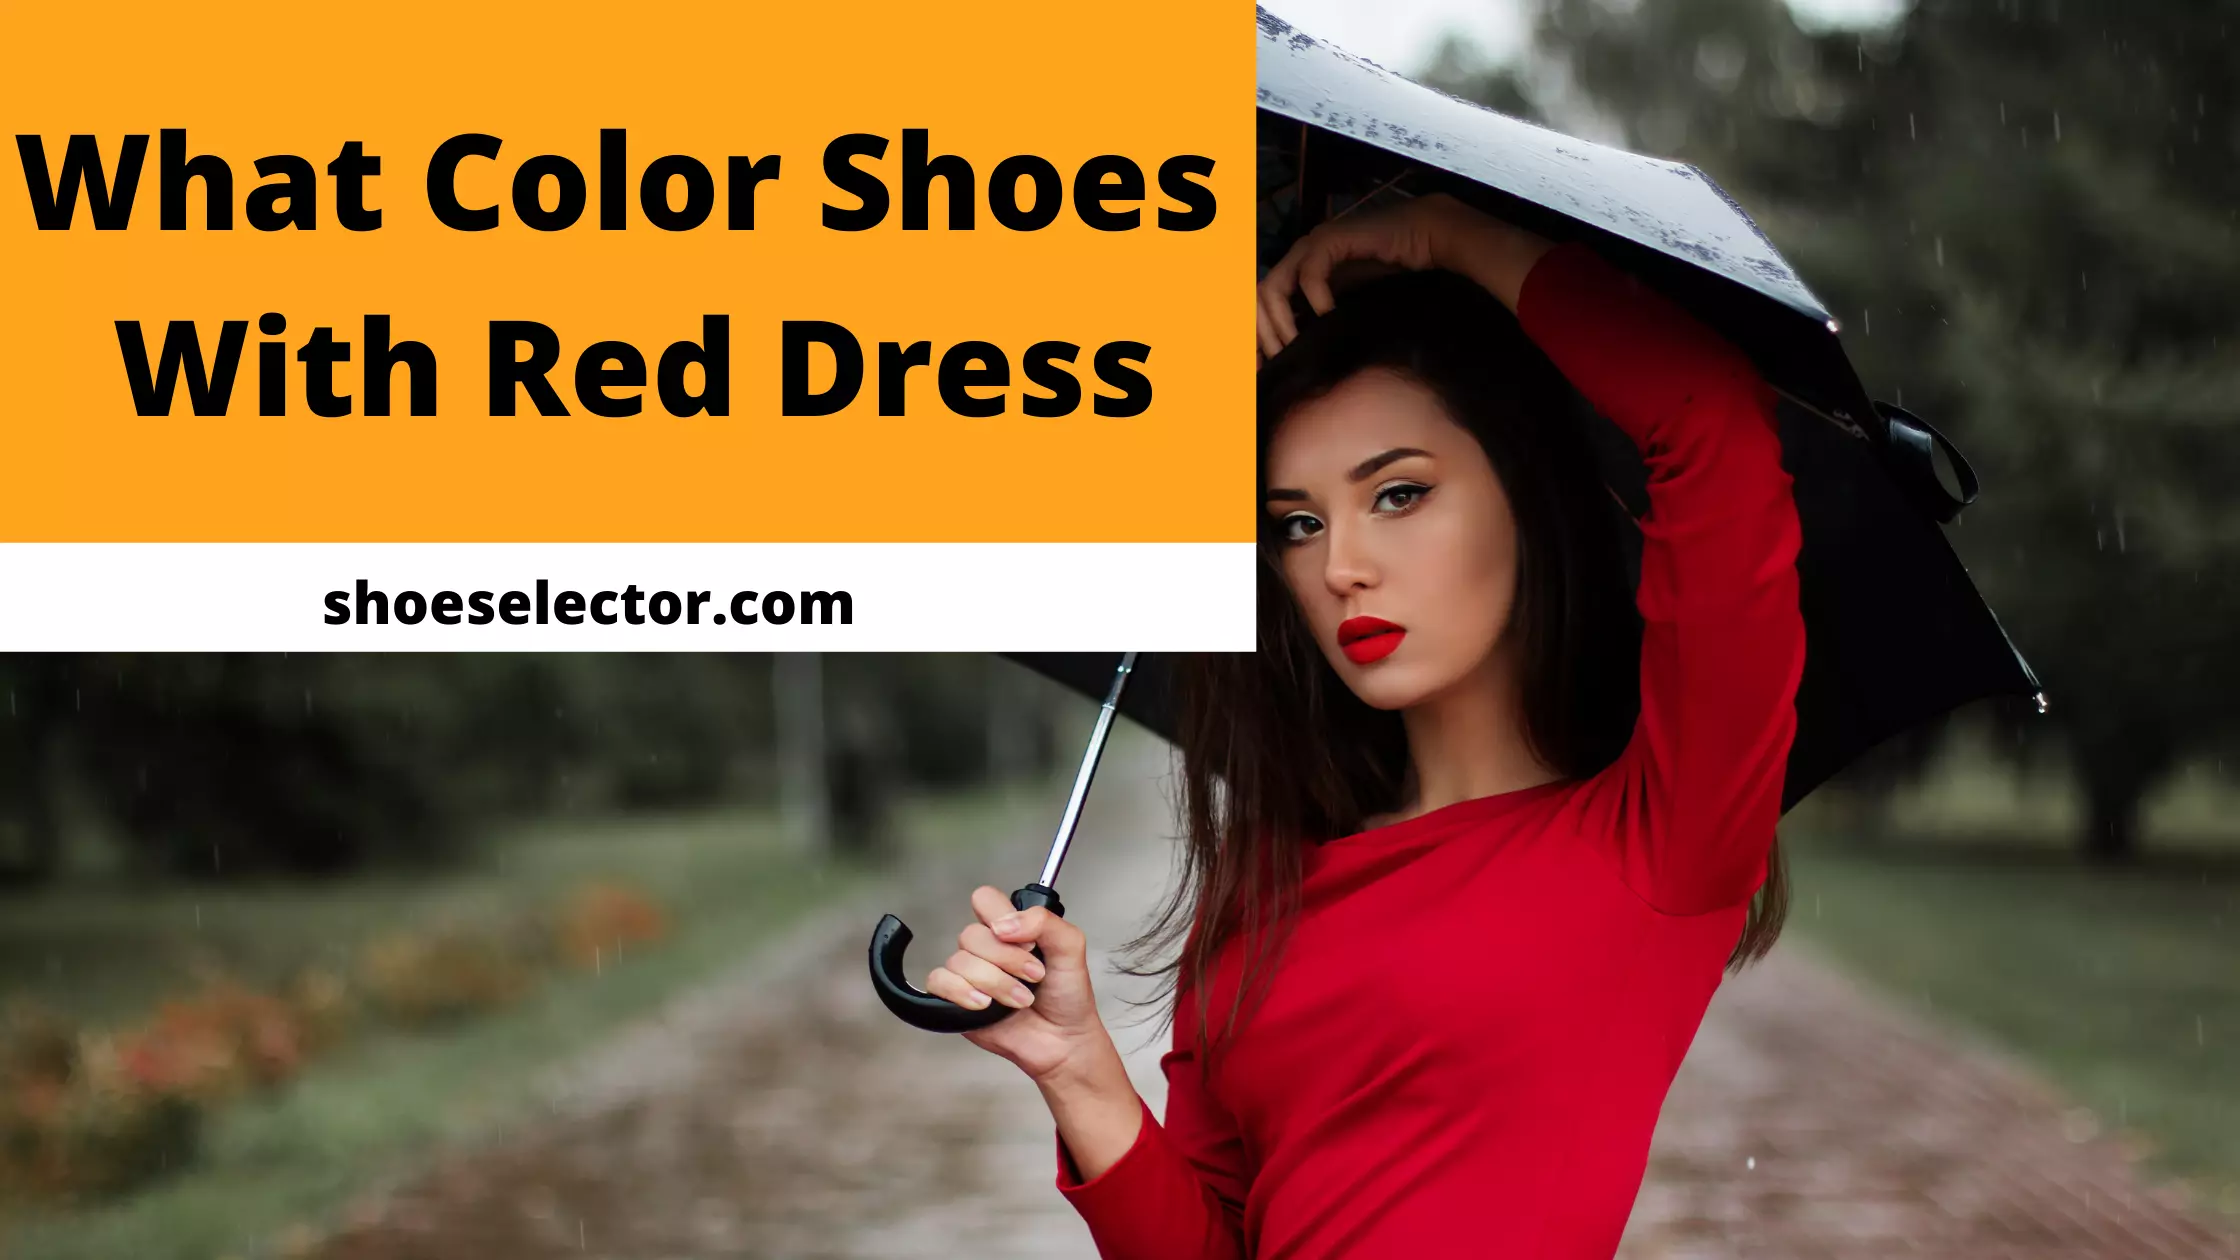 What Color Shoes to Wear With a Red Dress: The Perfect Match